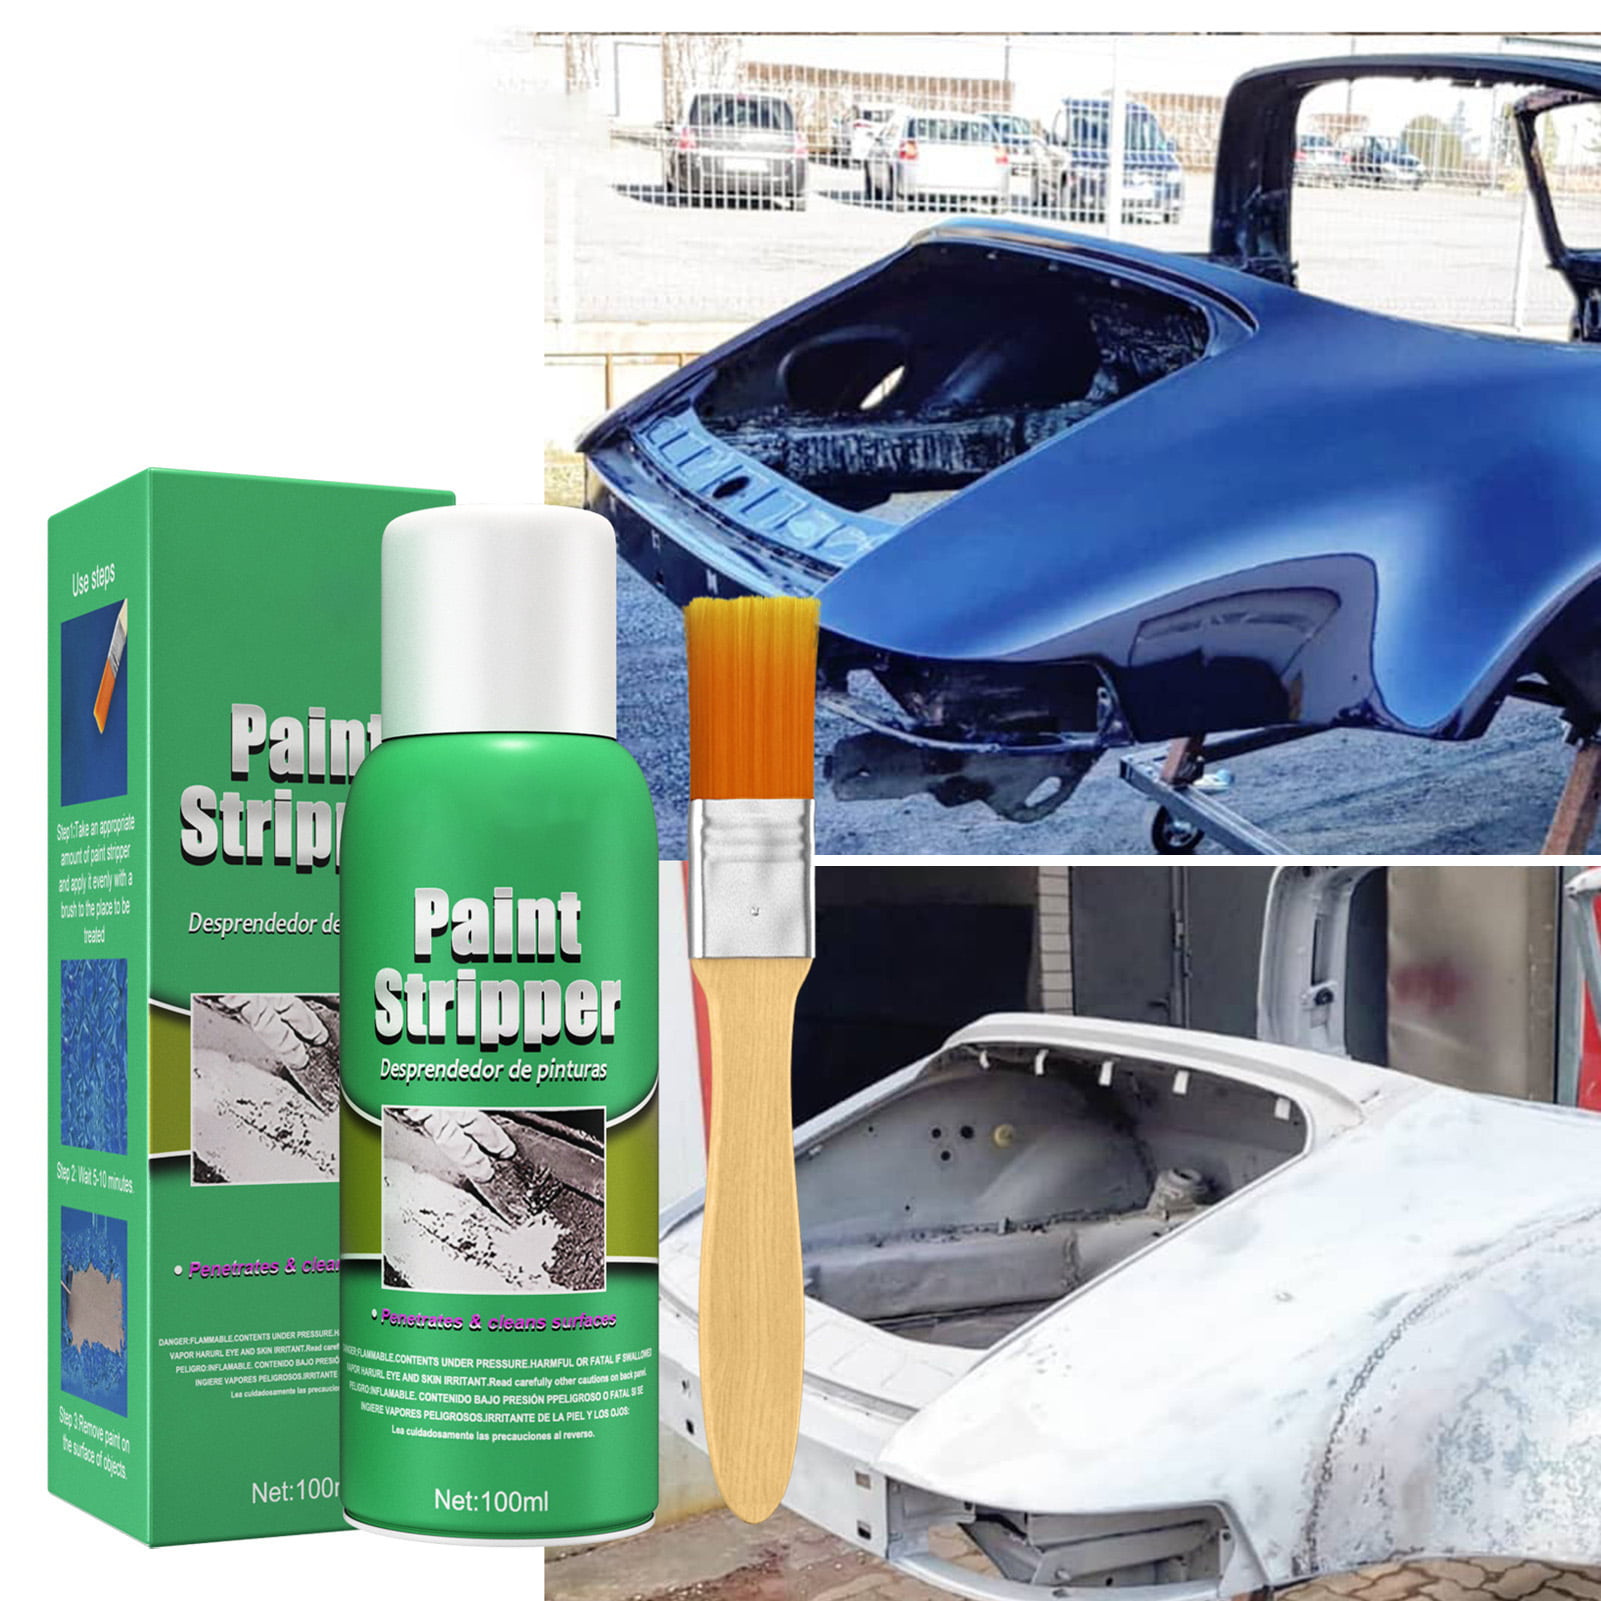 EXQST High Efficiency Car Paint Stripper for Car Metal Surface